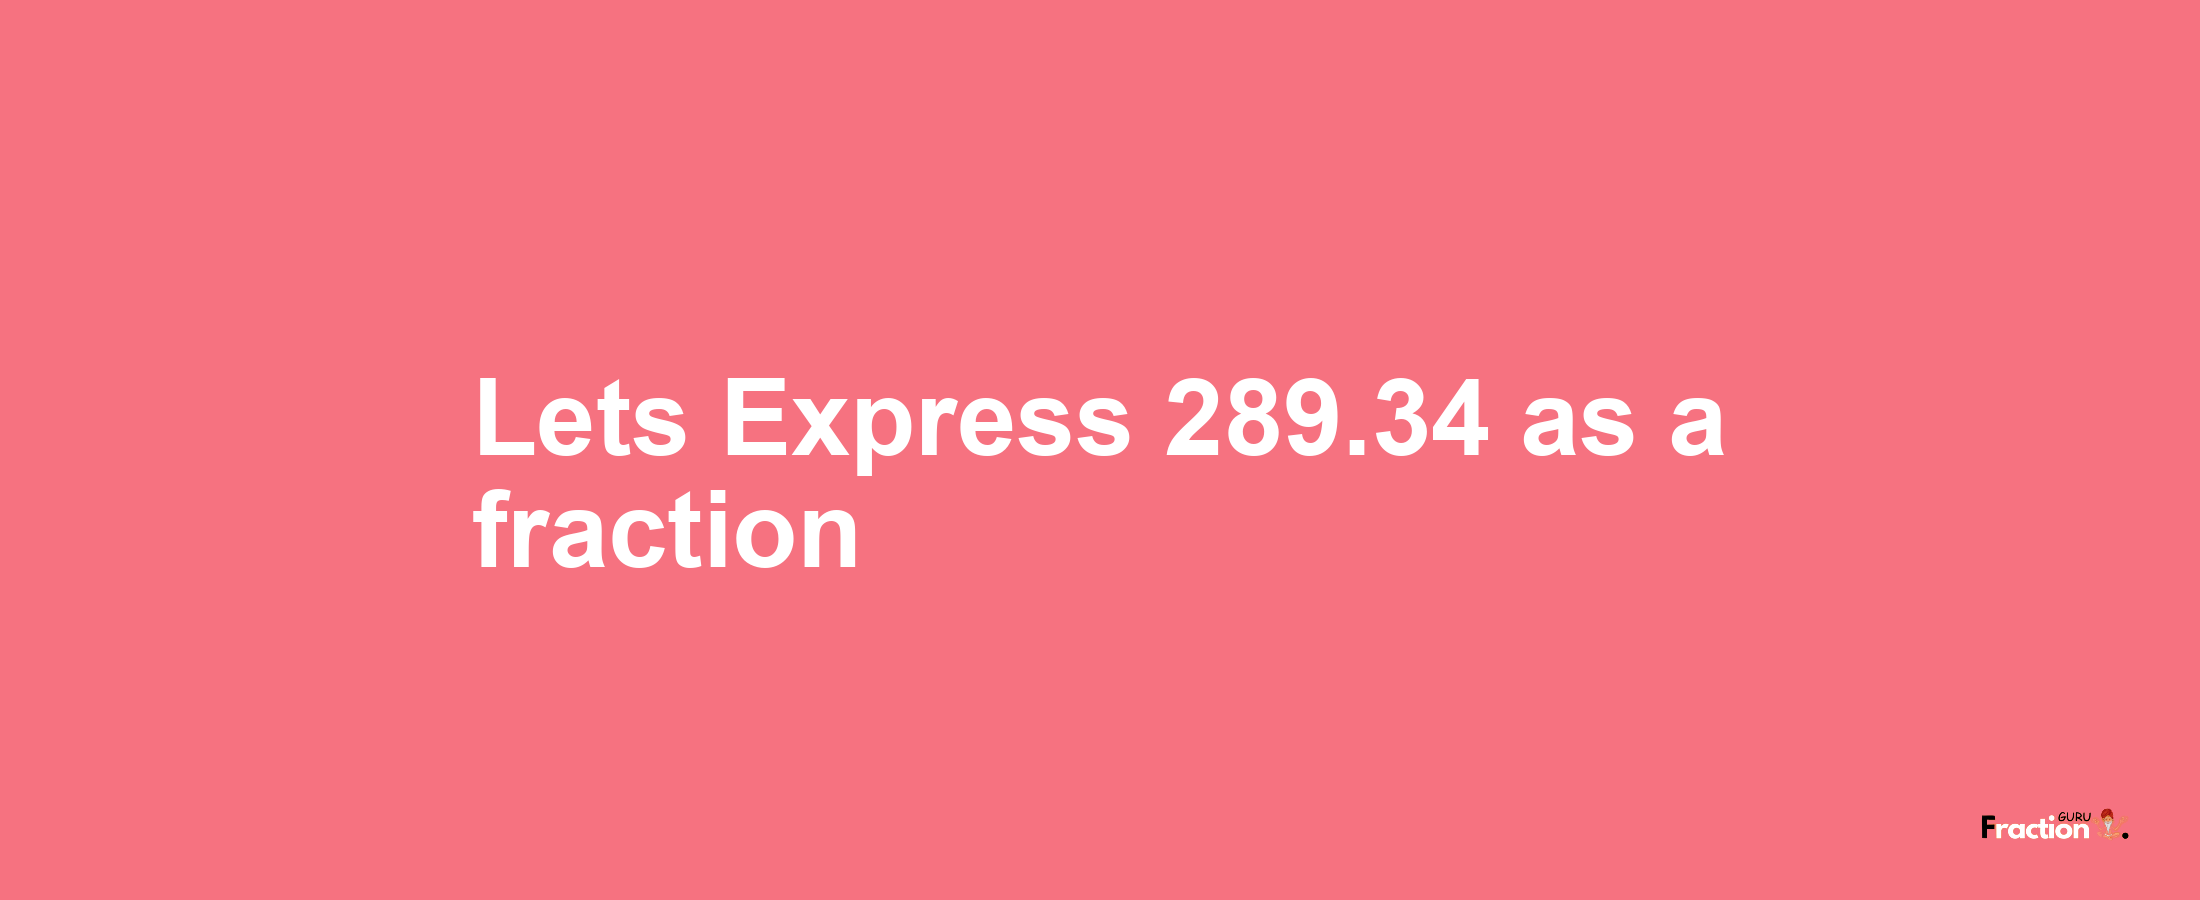 Lets Express 289.34 as afraction